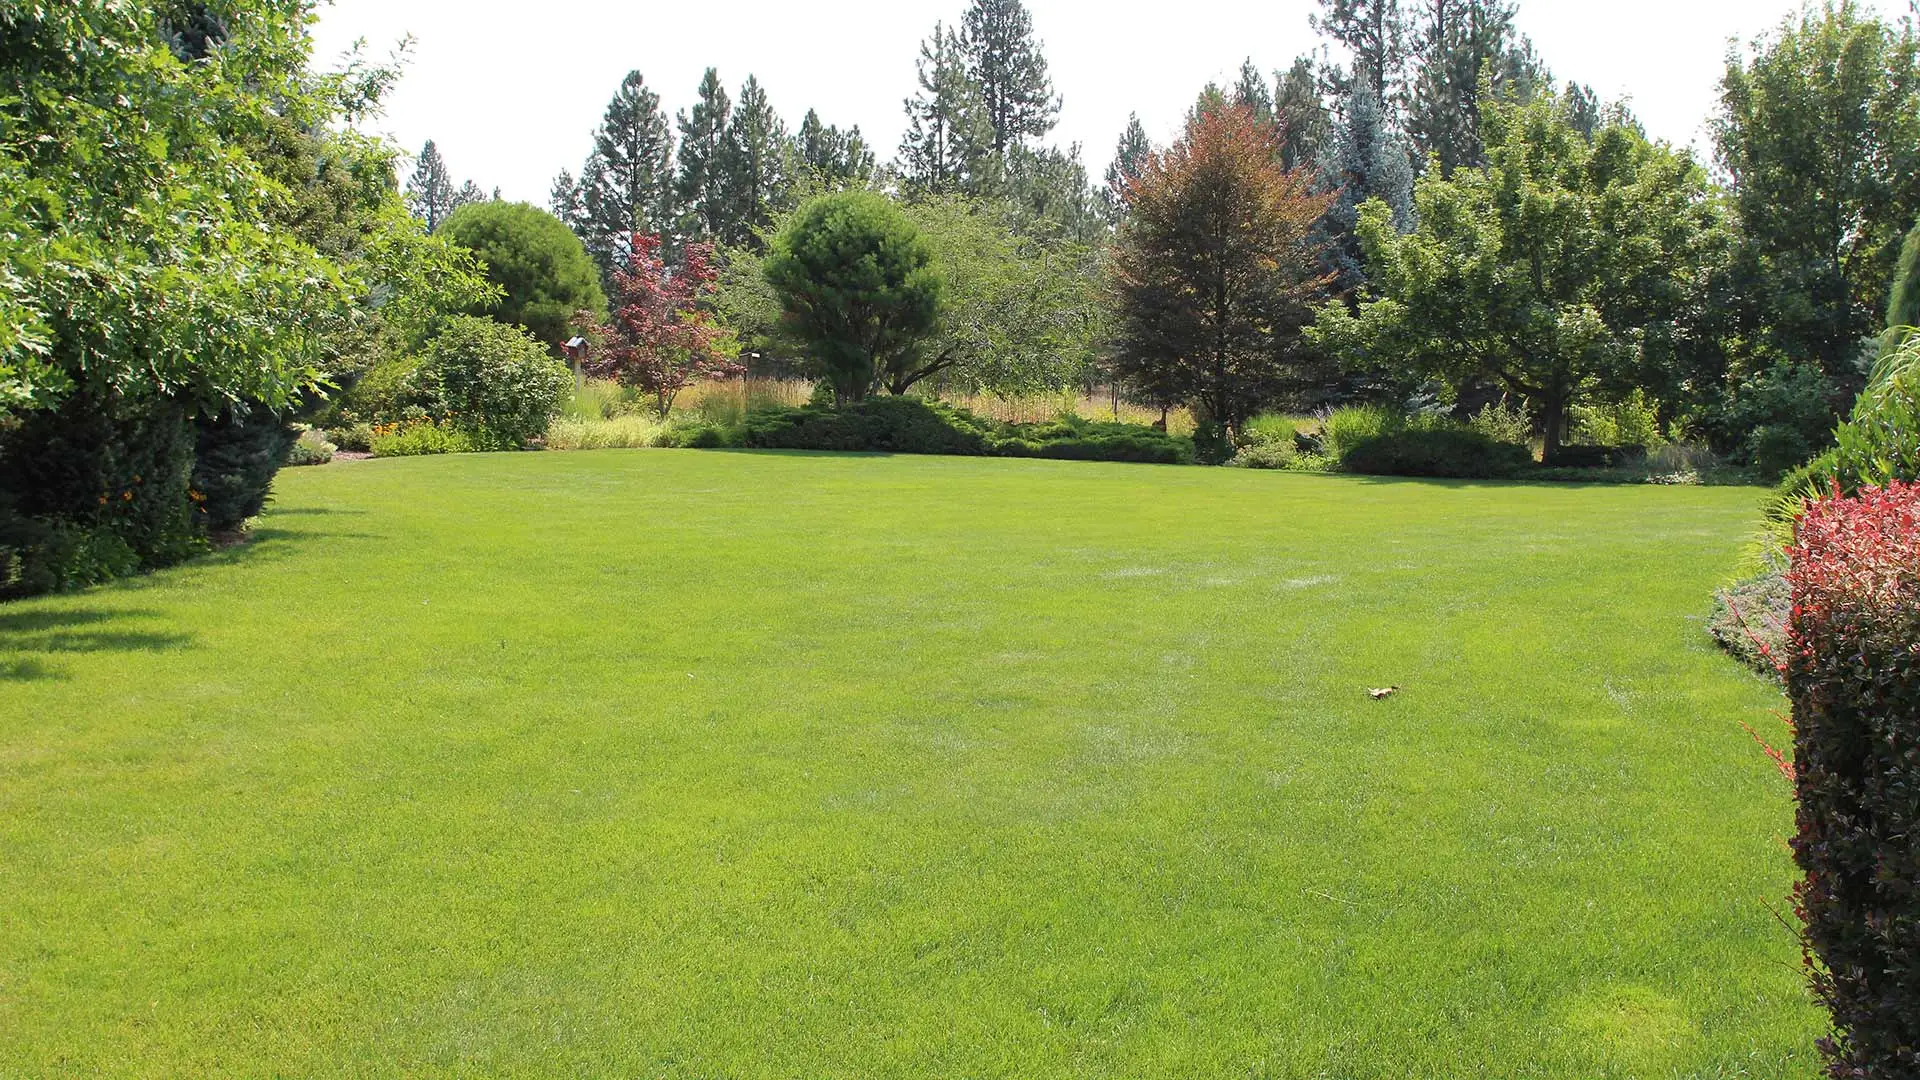 Healthy, green lawn and landscaping in Veradale, WA.